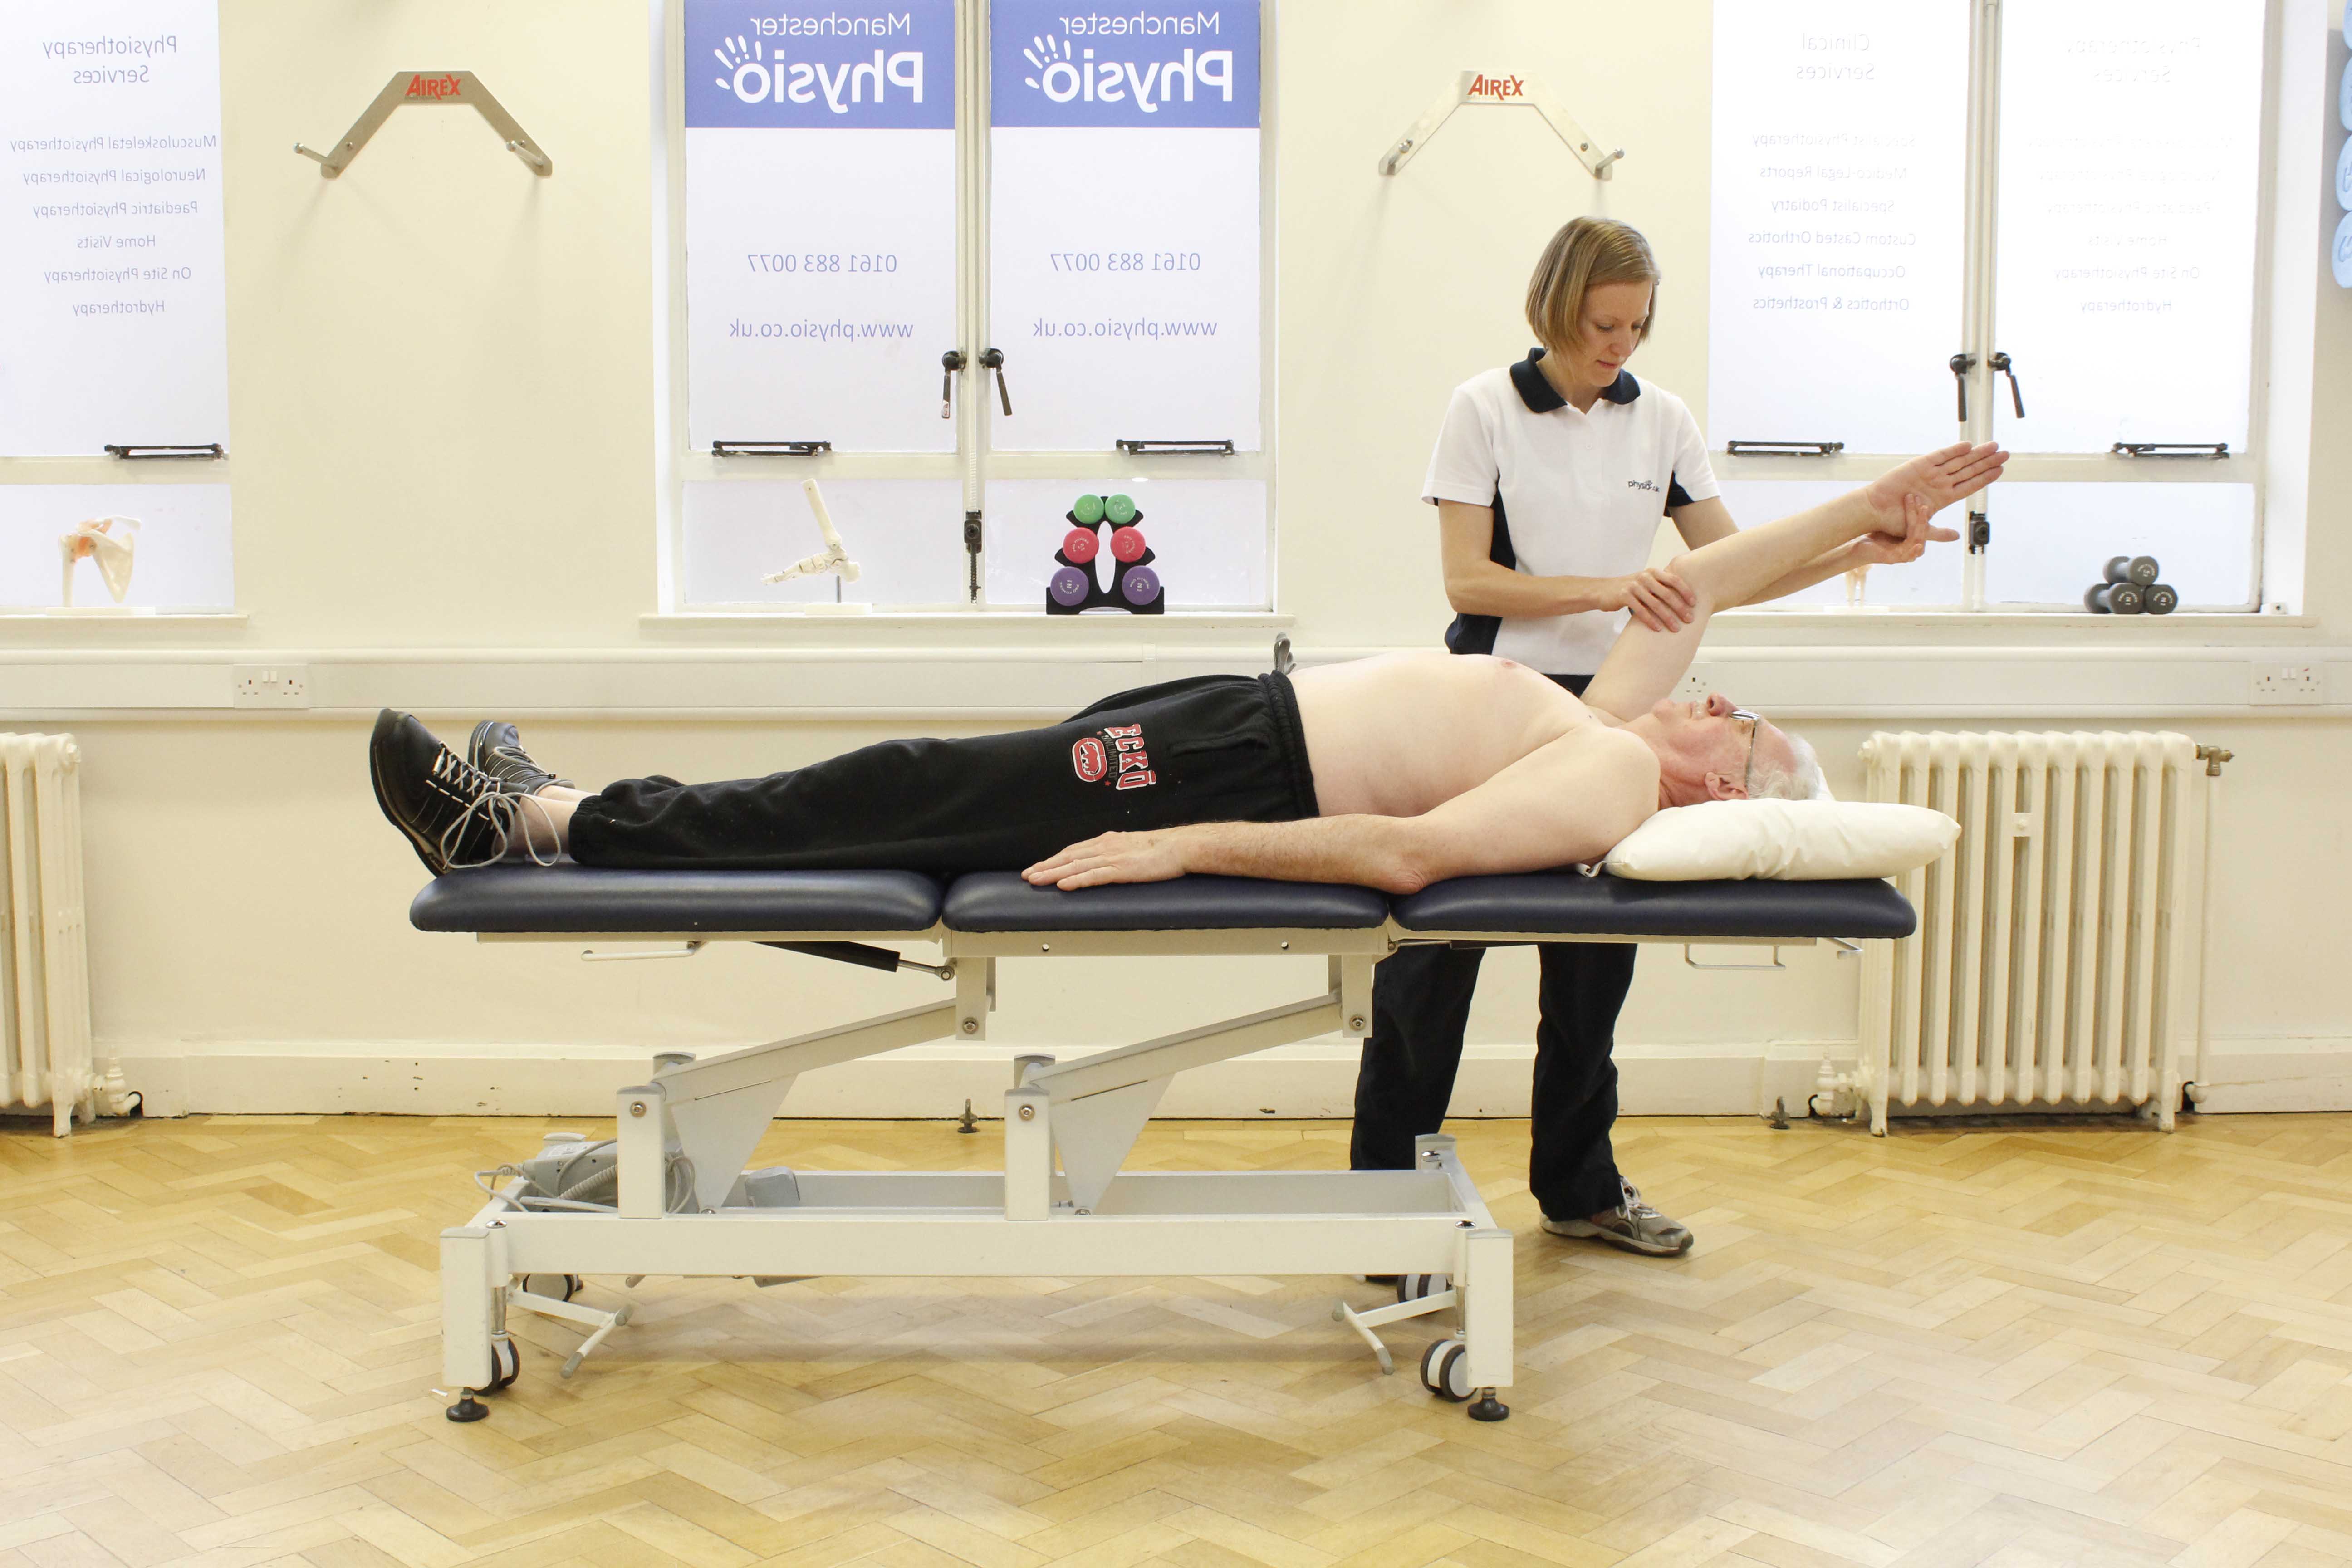 Upper limb mobility exercises conducted by a specialist physiotherapist